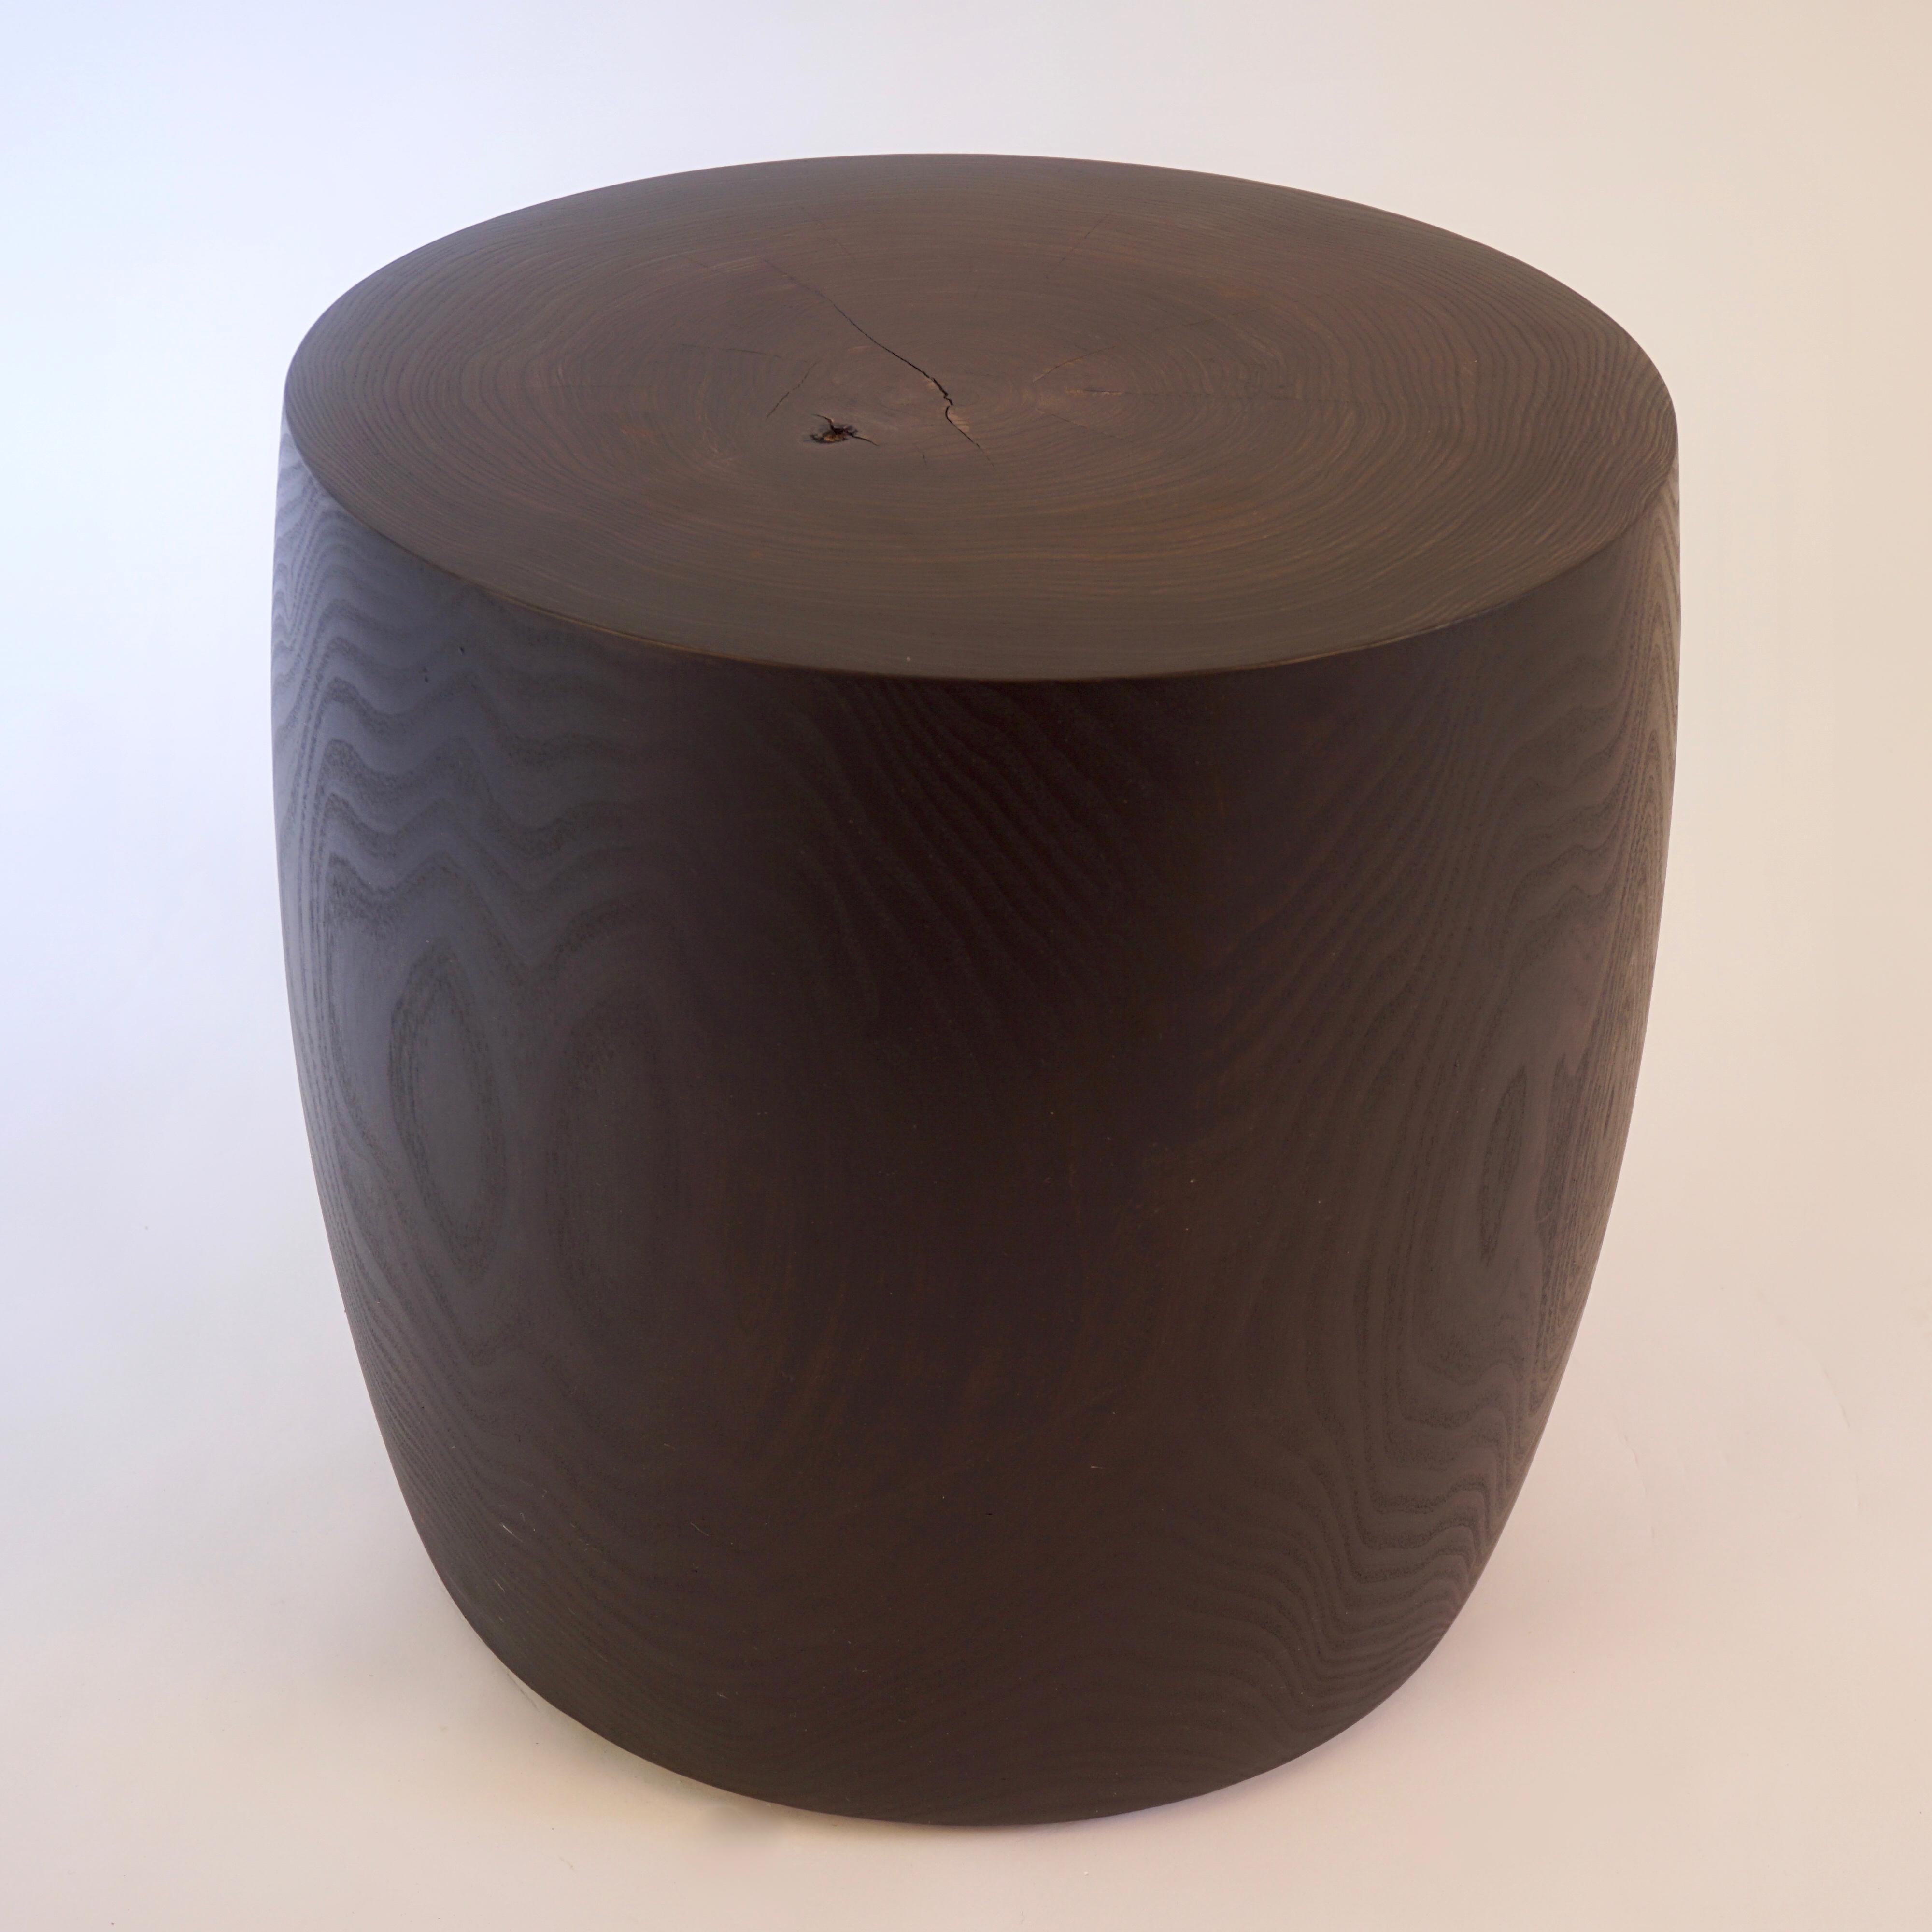 This custom version of the #9 Pedestal, one of the ten original shapes in the Lehrecke Pedestal collection from 1996, is ebonised catalpa, made from a log from the Hudson Valley, in New York State.

All of Lehrecke's Pedestals are made on a custom